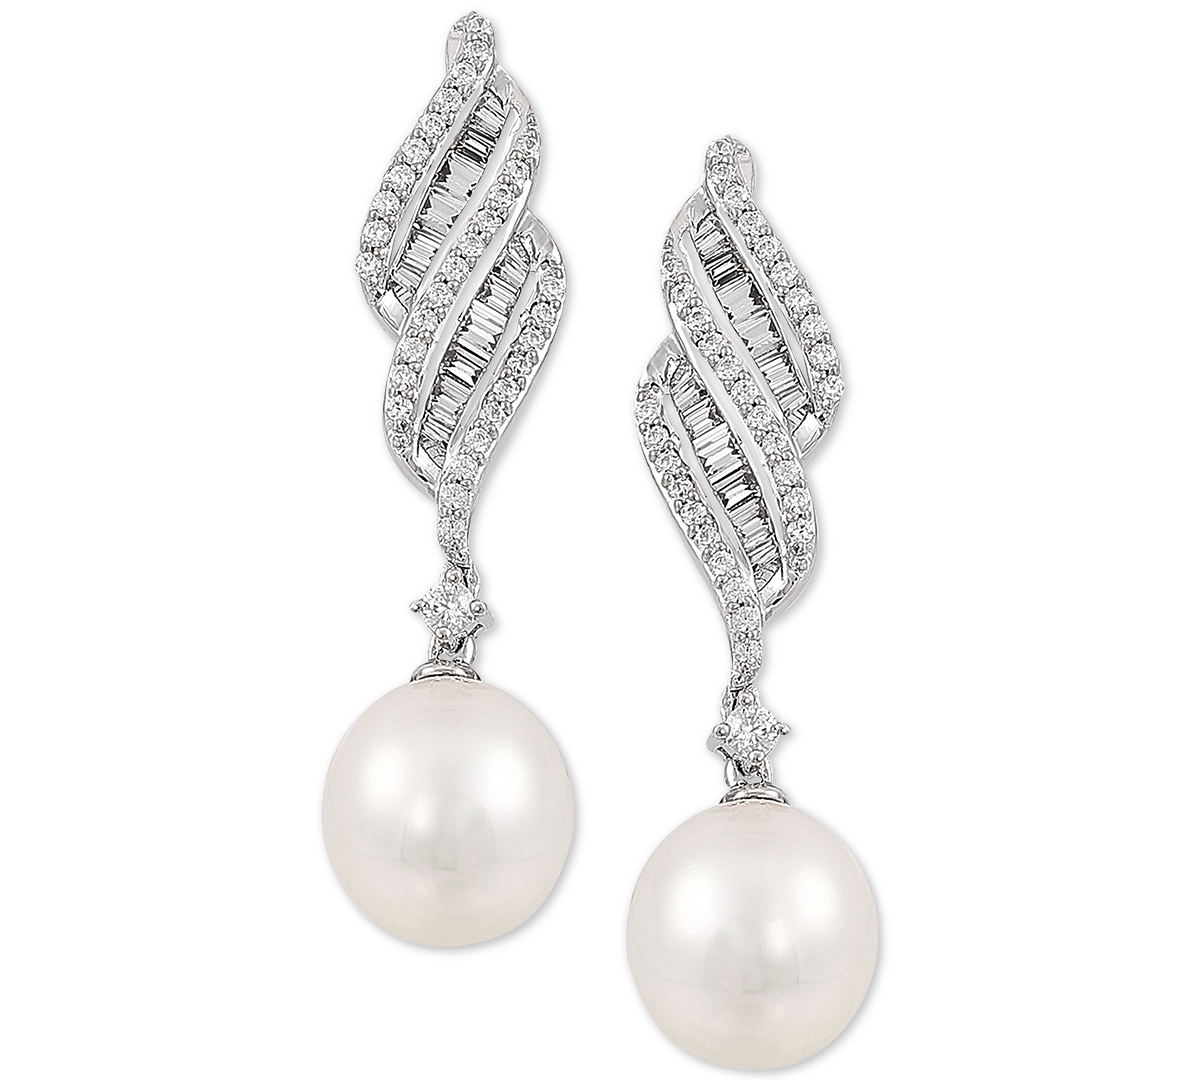 Cultured Freshwater Pearl (7mm) & Cubic Zirconia Drop Earrings in Sterling Silver, Created for Macy's - Sterling Silver